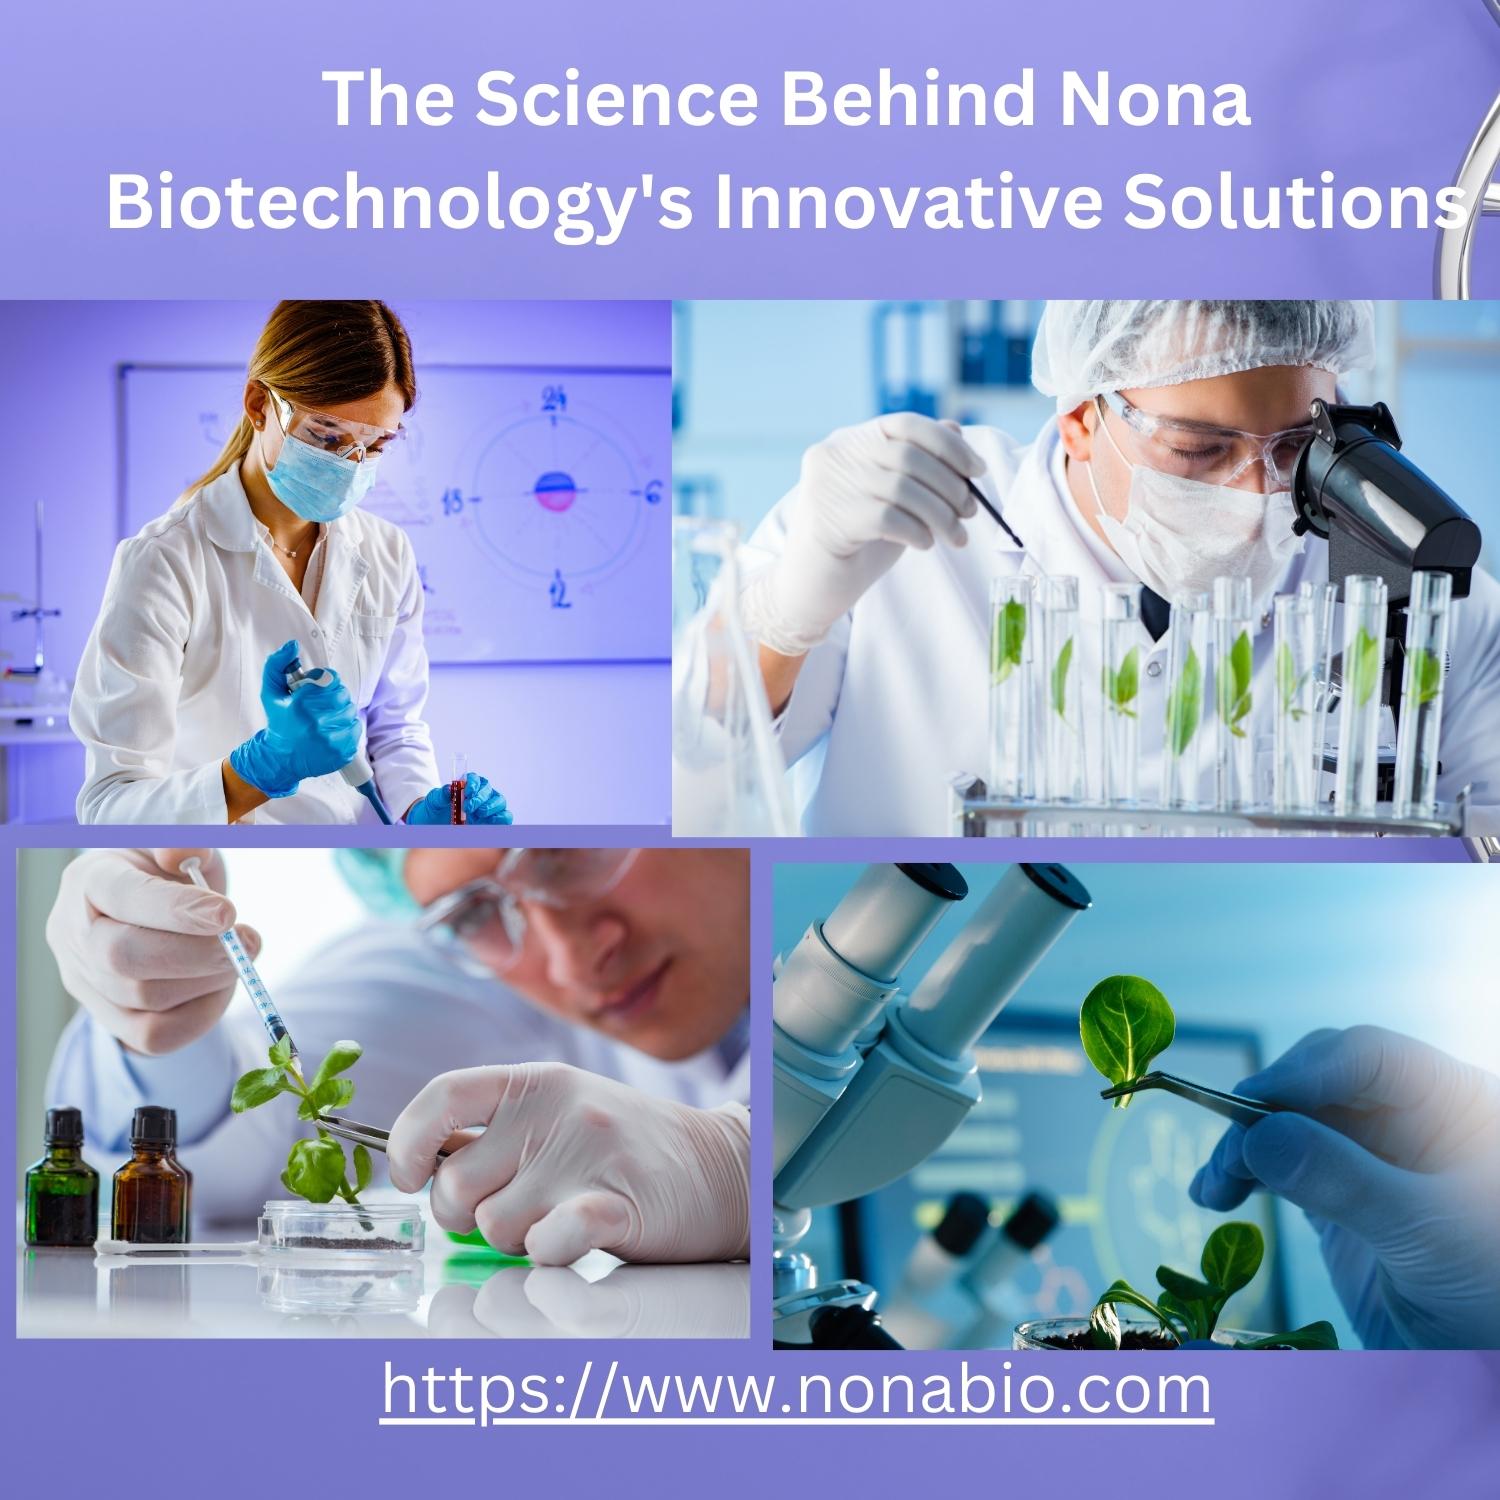 What is Nona Biotechnology and how is it revolutionizing the field of biotechnology and healthcare